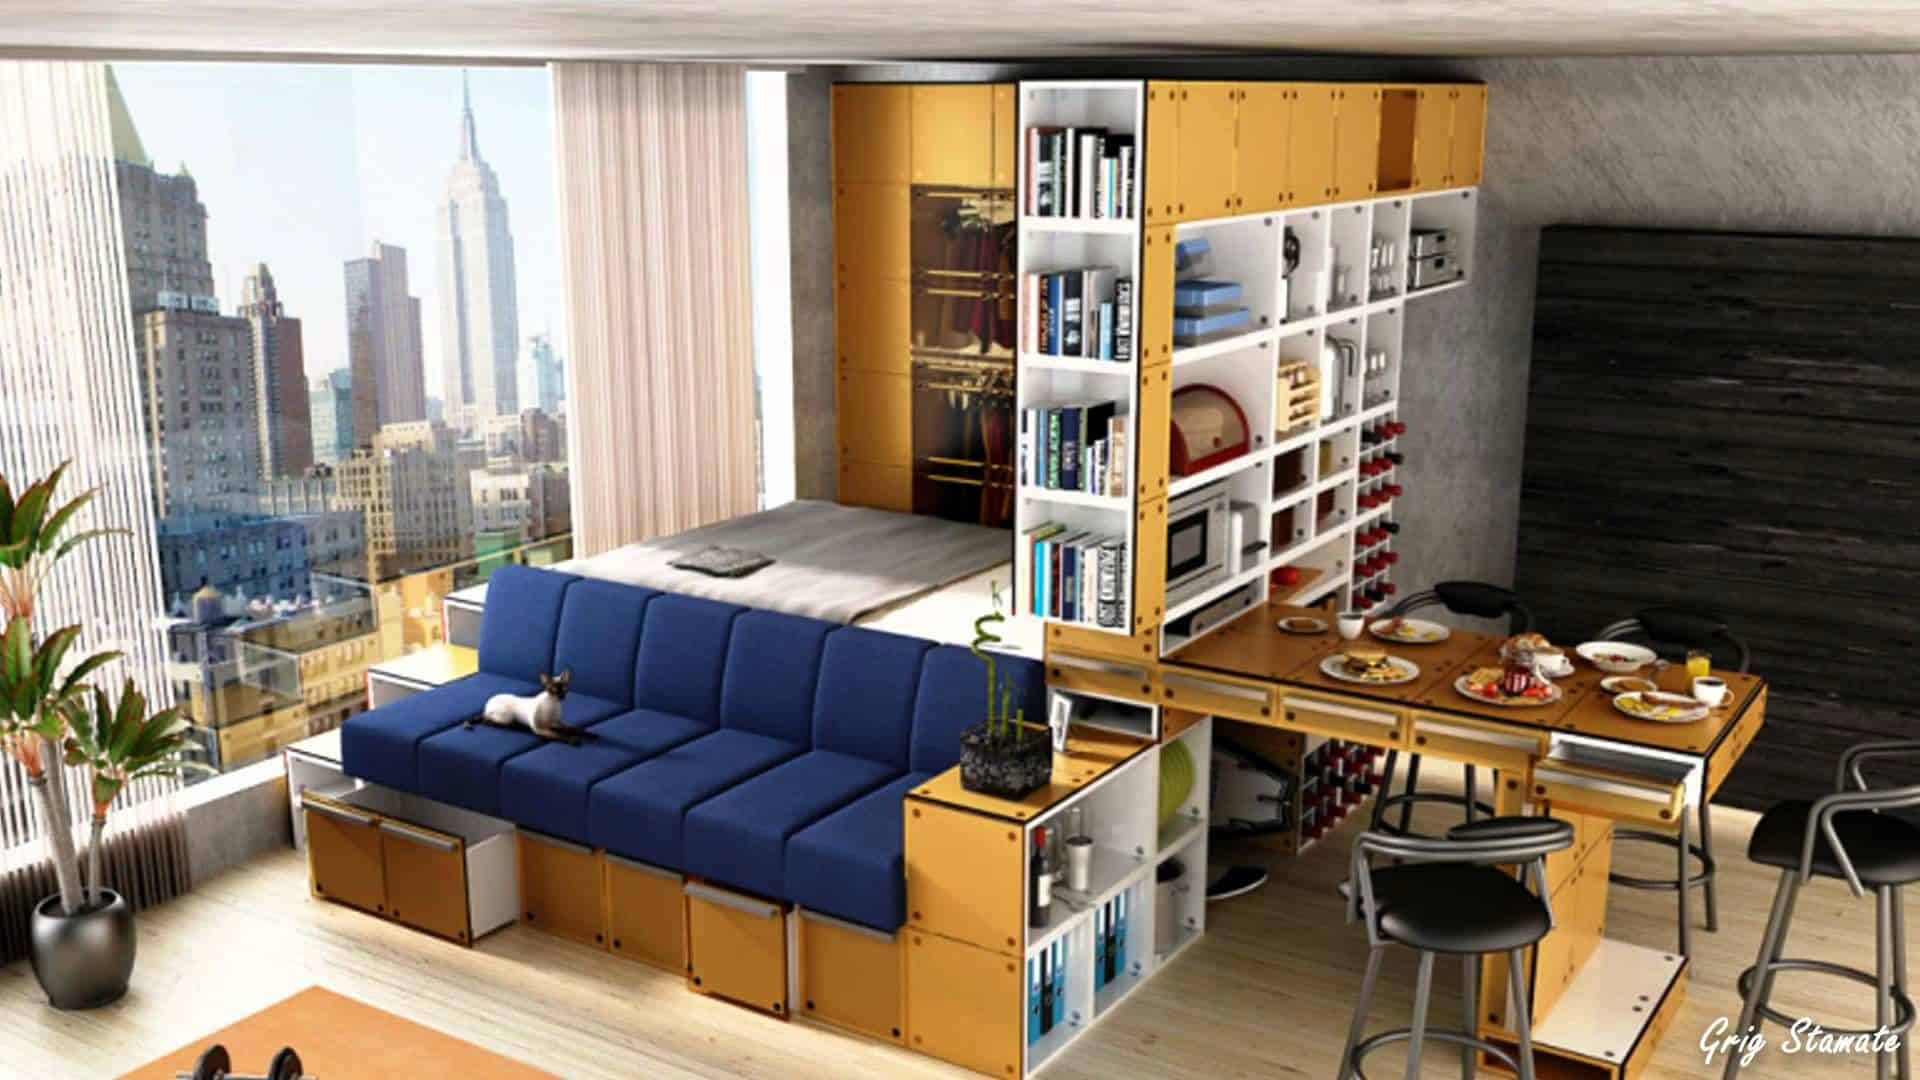 separate bed from living room